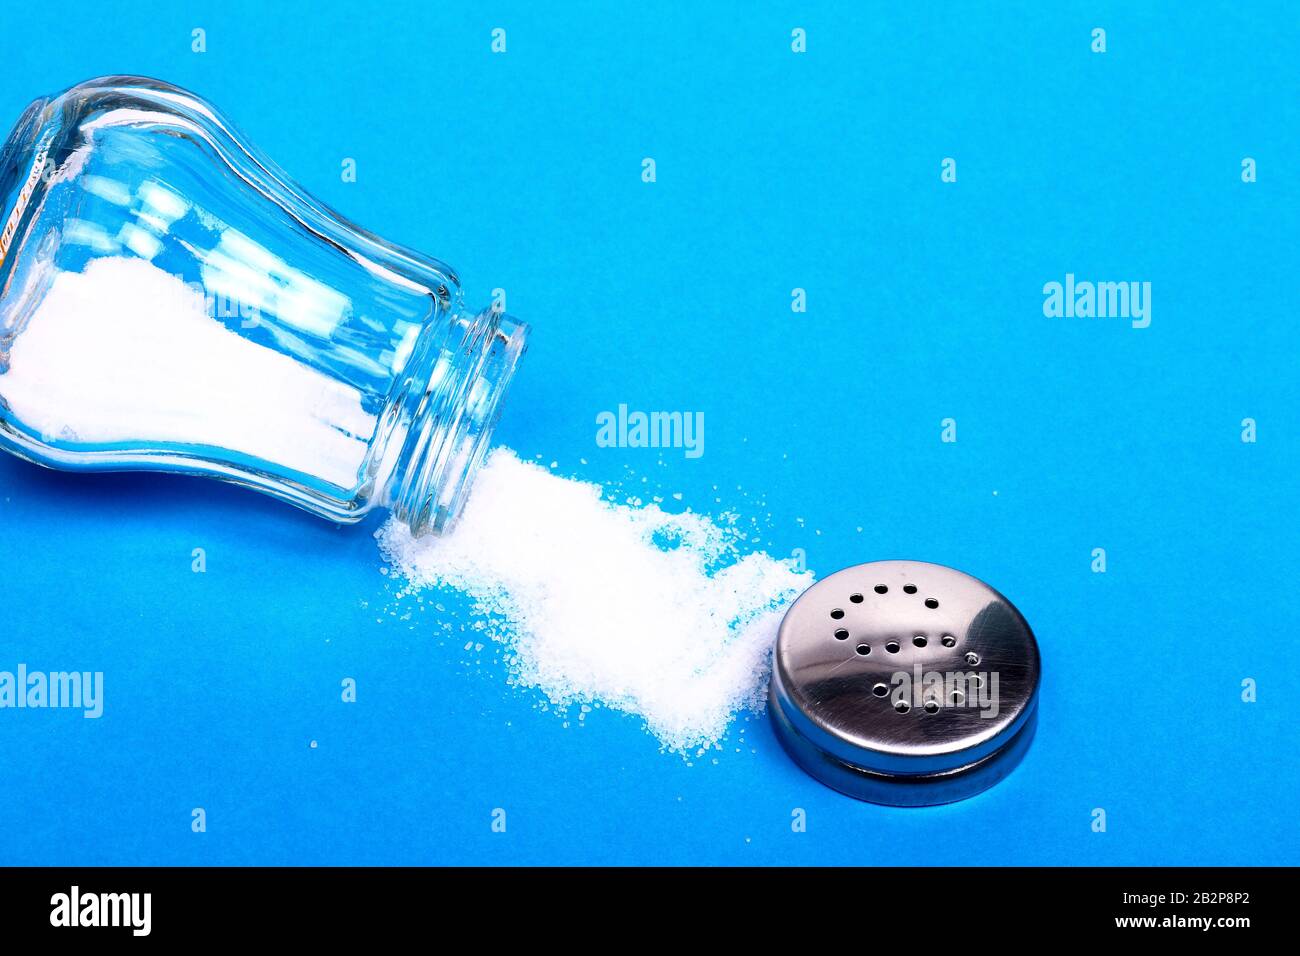 https://c8.alamy.com/comp/2B2P8P2/salt-spilling-out-from-a-glass-sat-shaker-isolated-on-a-blue-background-with-copy-space-2B2P8P2.jpg